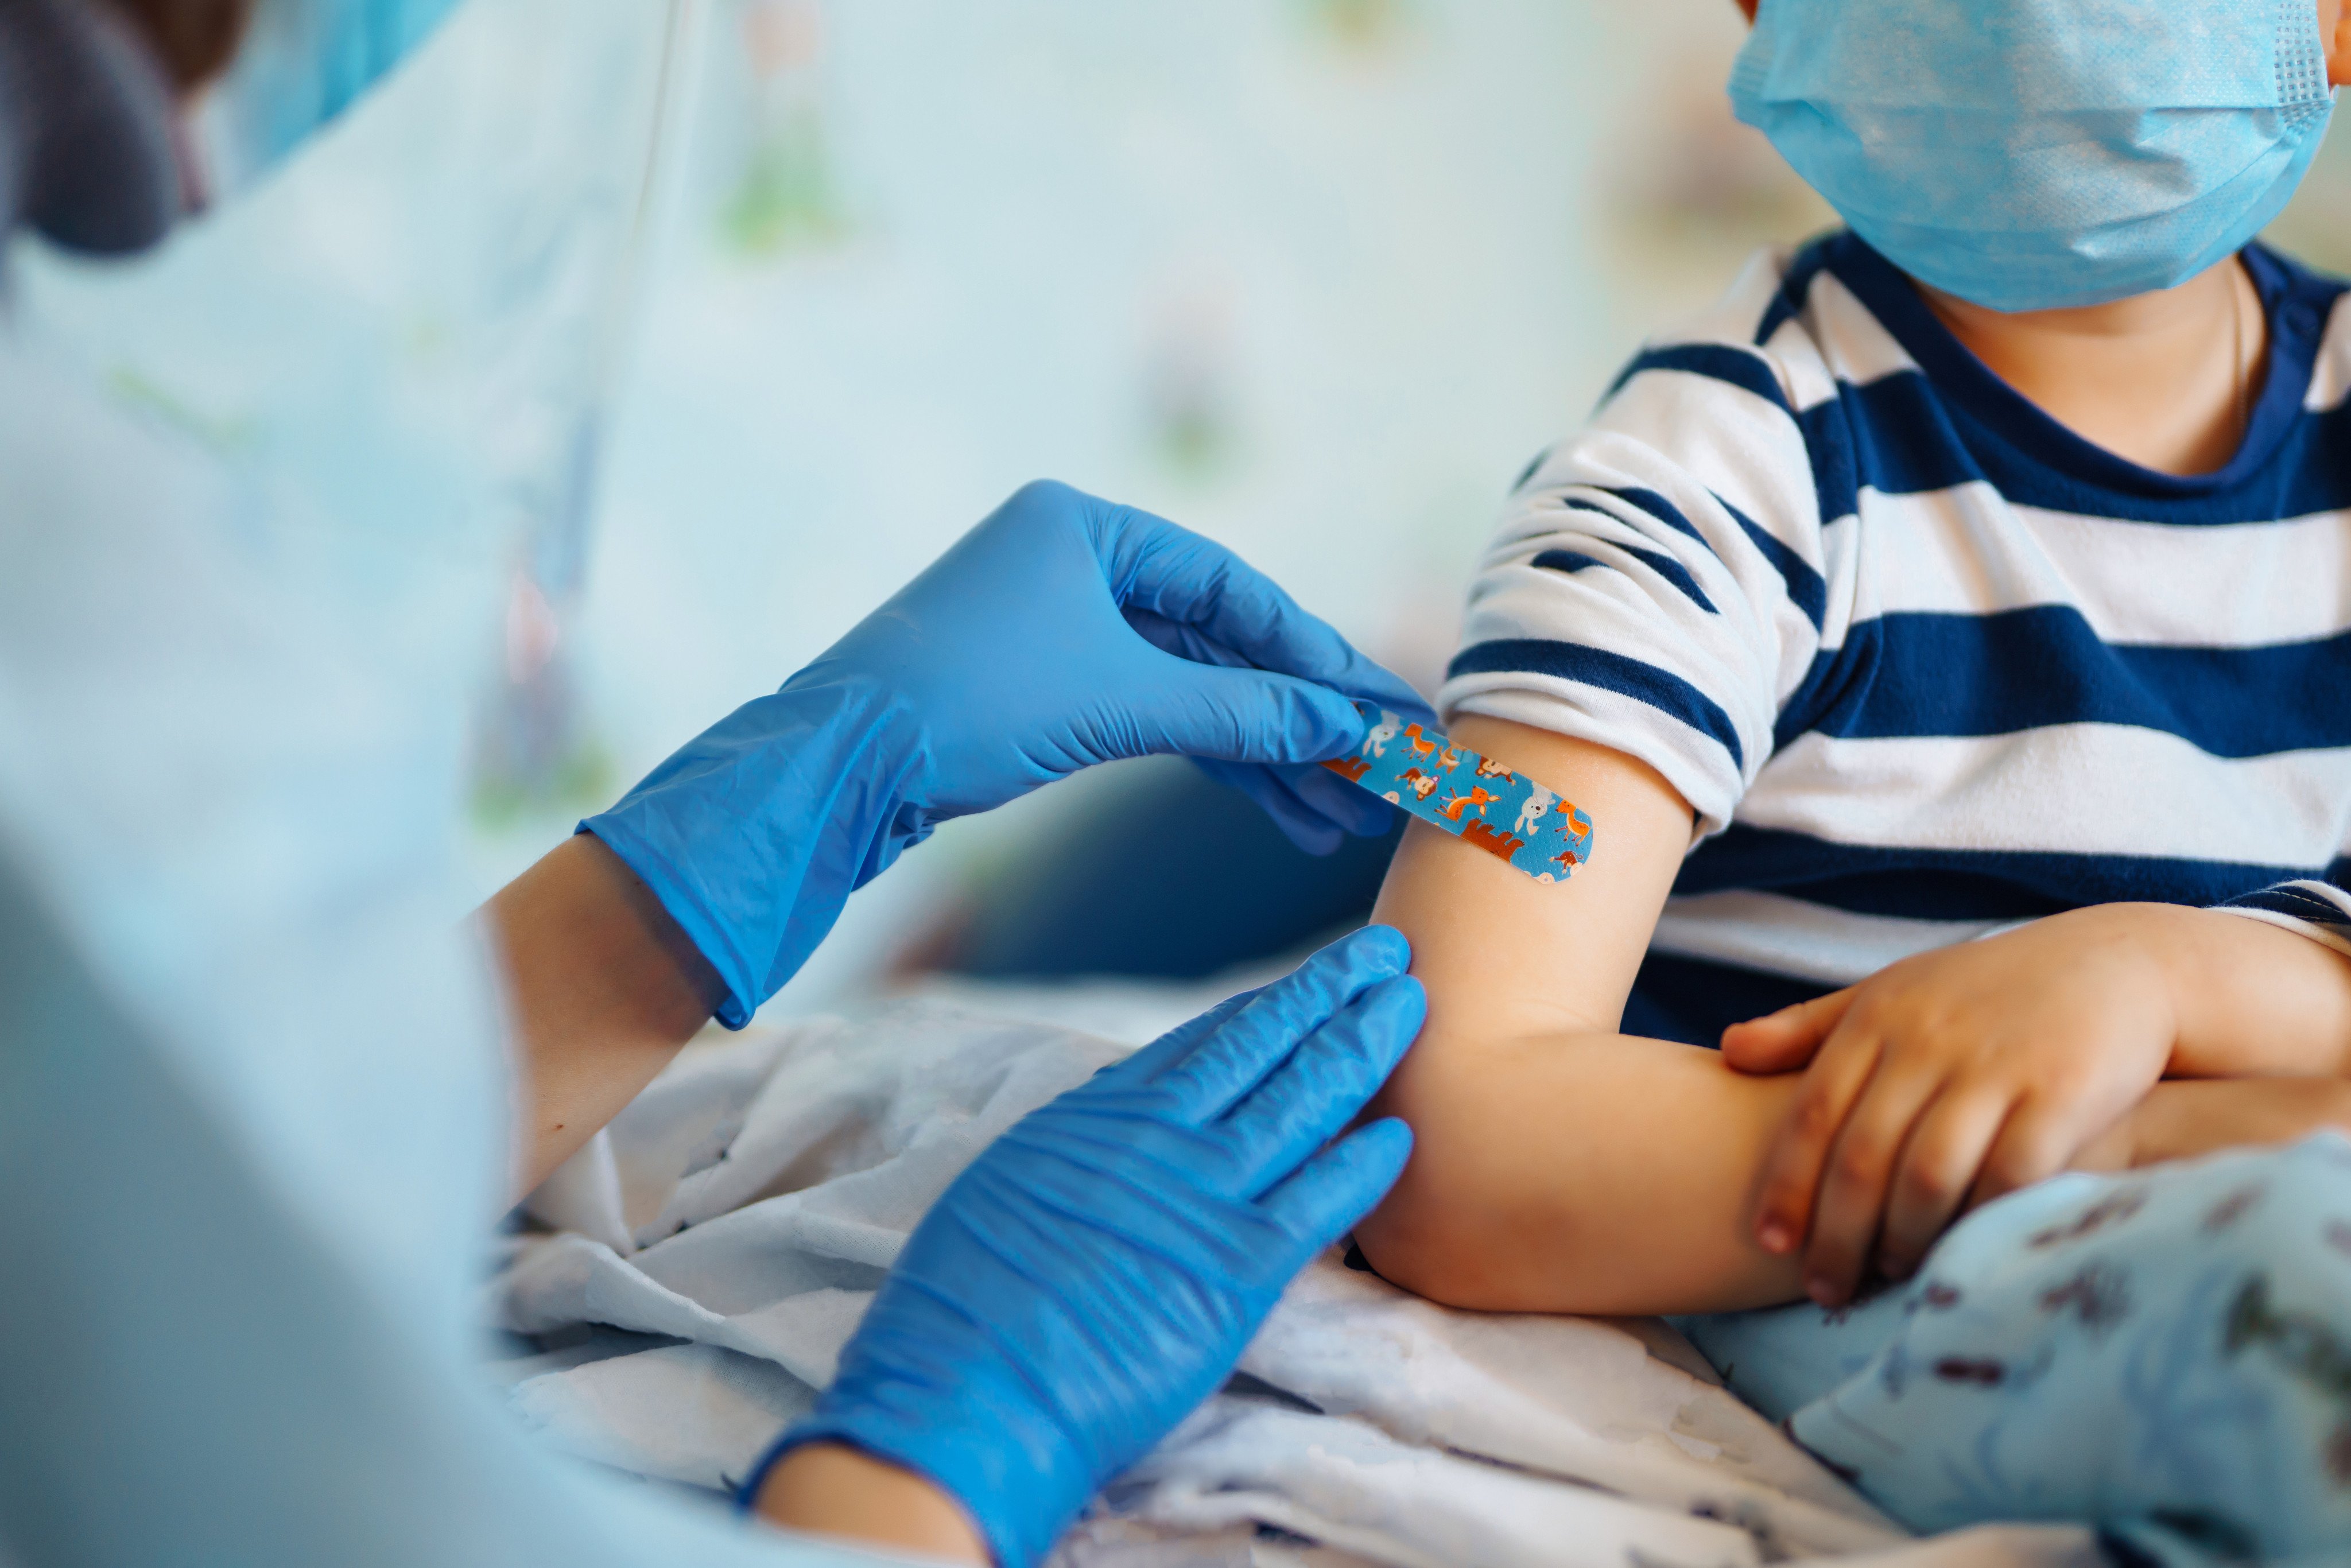 The flu vaccination rate for children aged 12 or younger in Hong Kong is roughly 50 per cent. Photo: Shutterstock